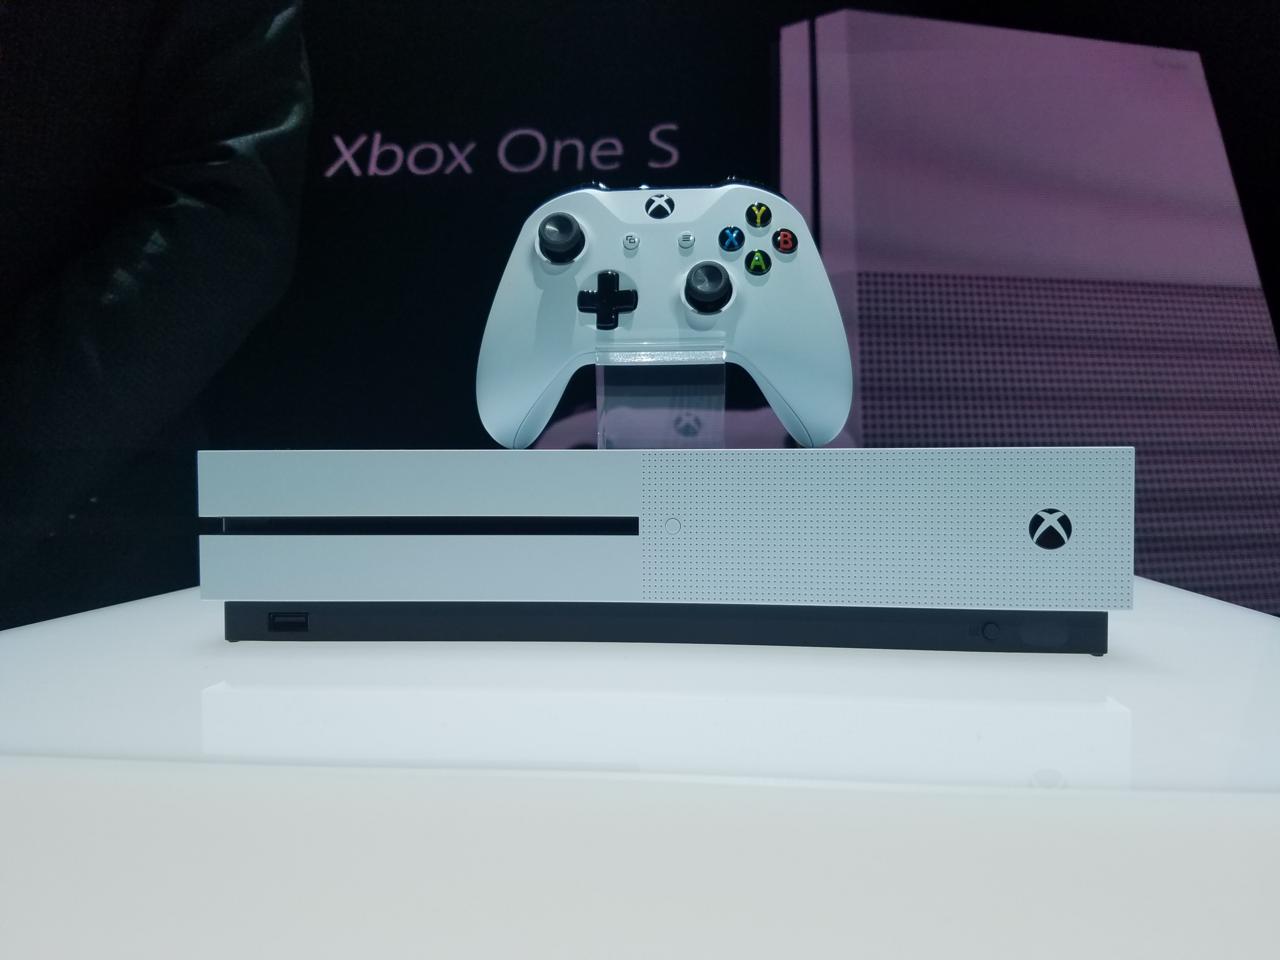 Play video and music files on Xbox One S